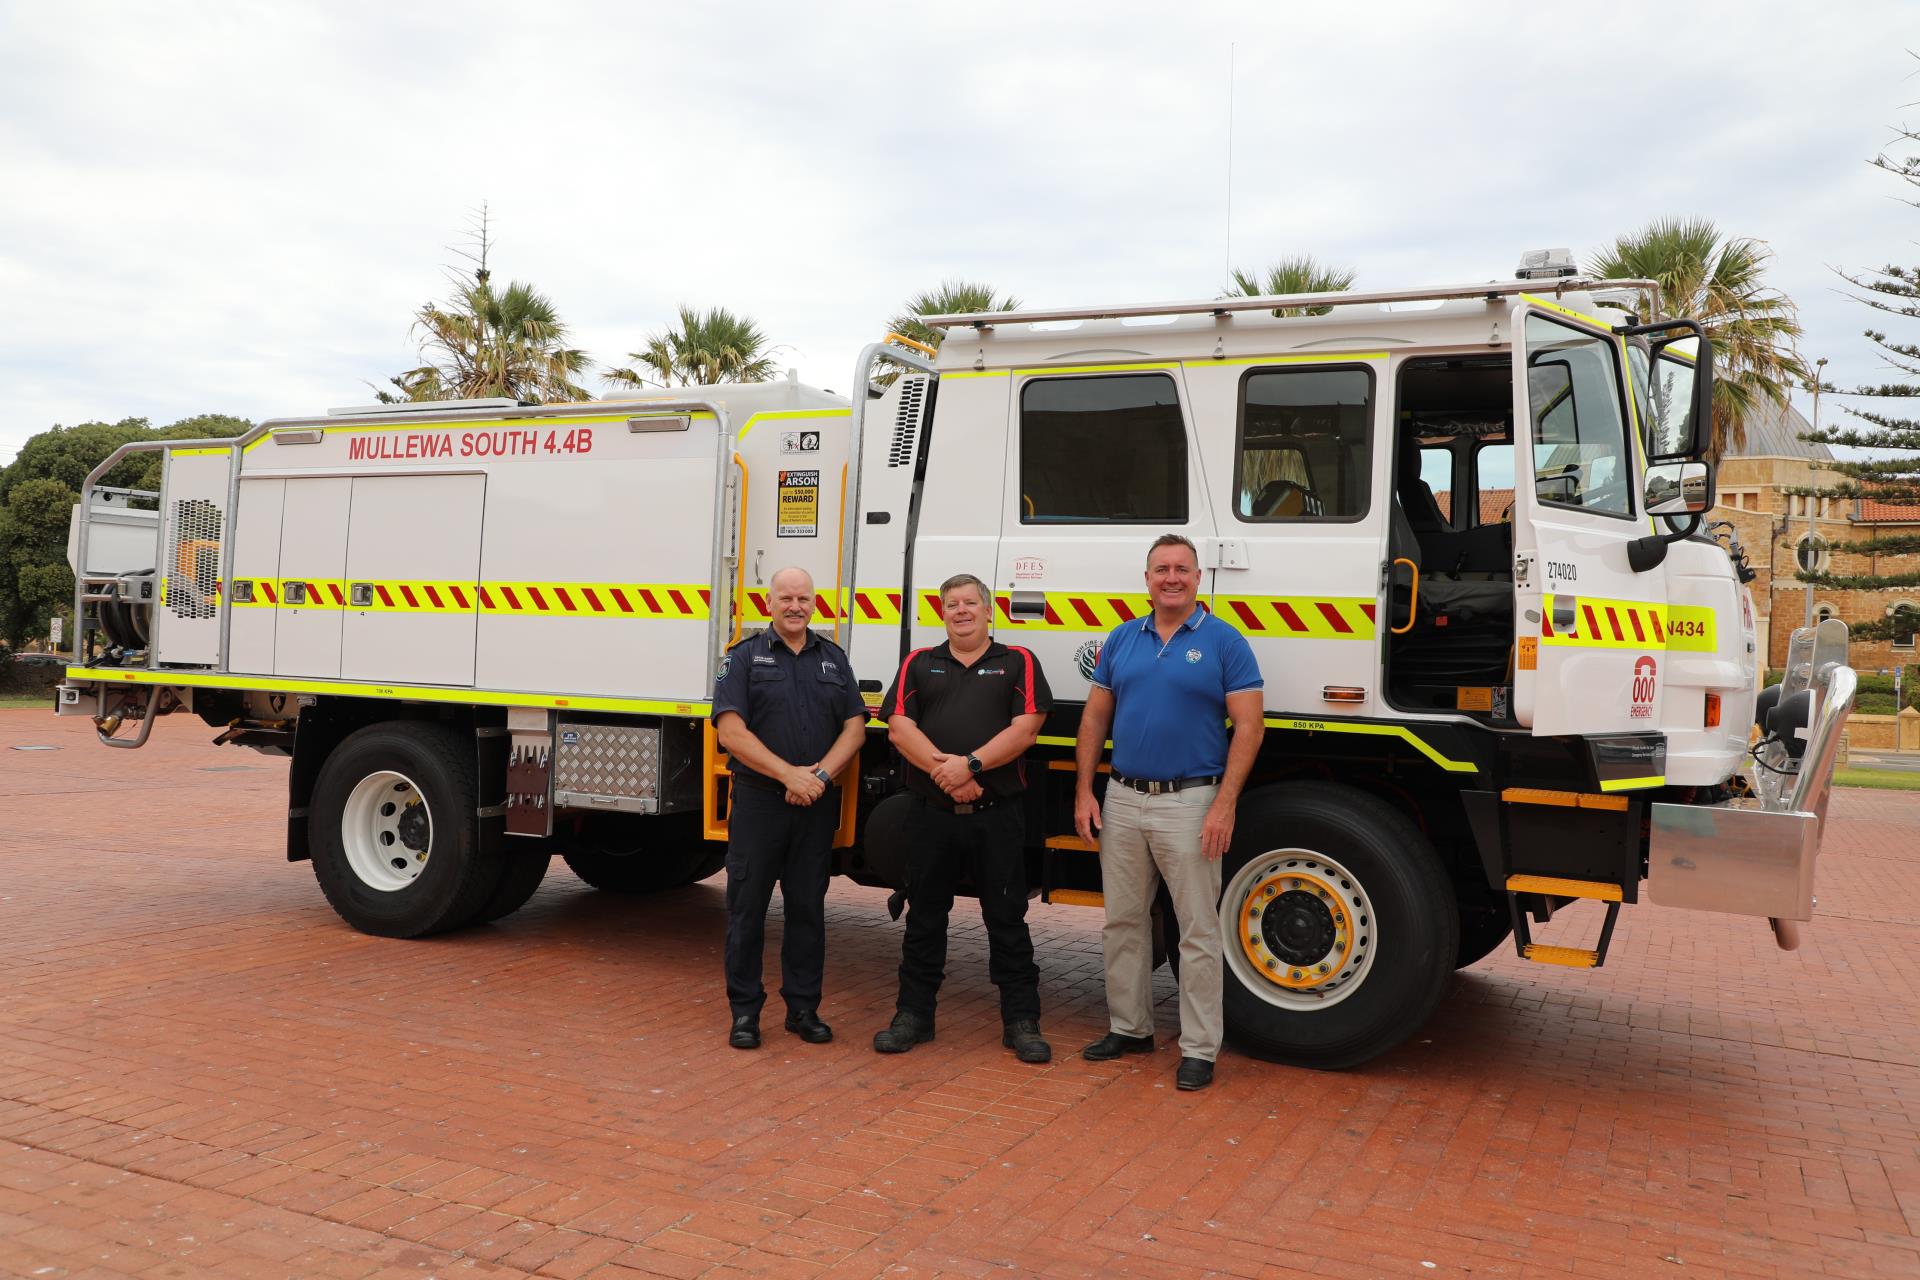 New bush fire truck for Mullewa and Pindar